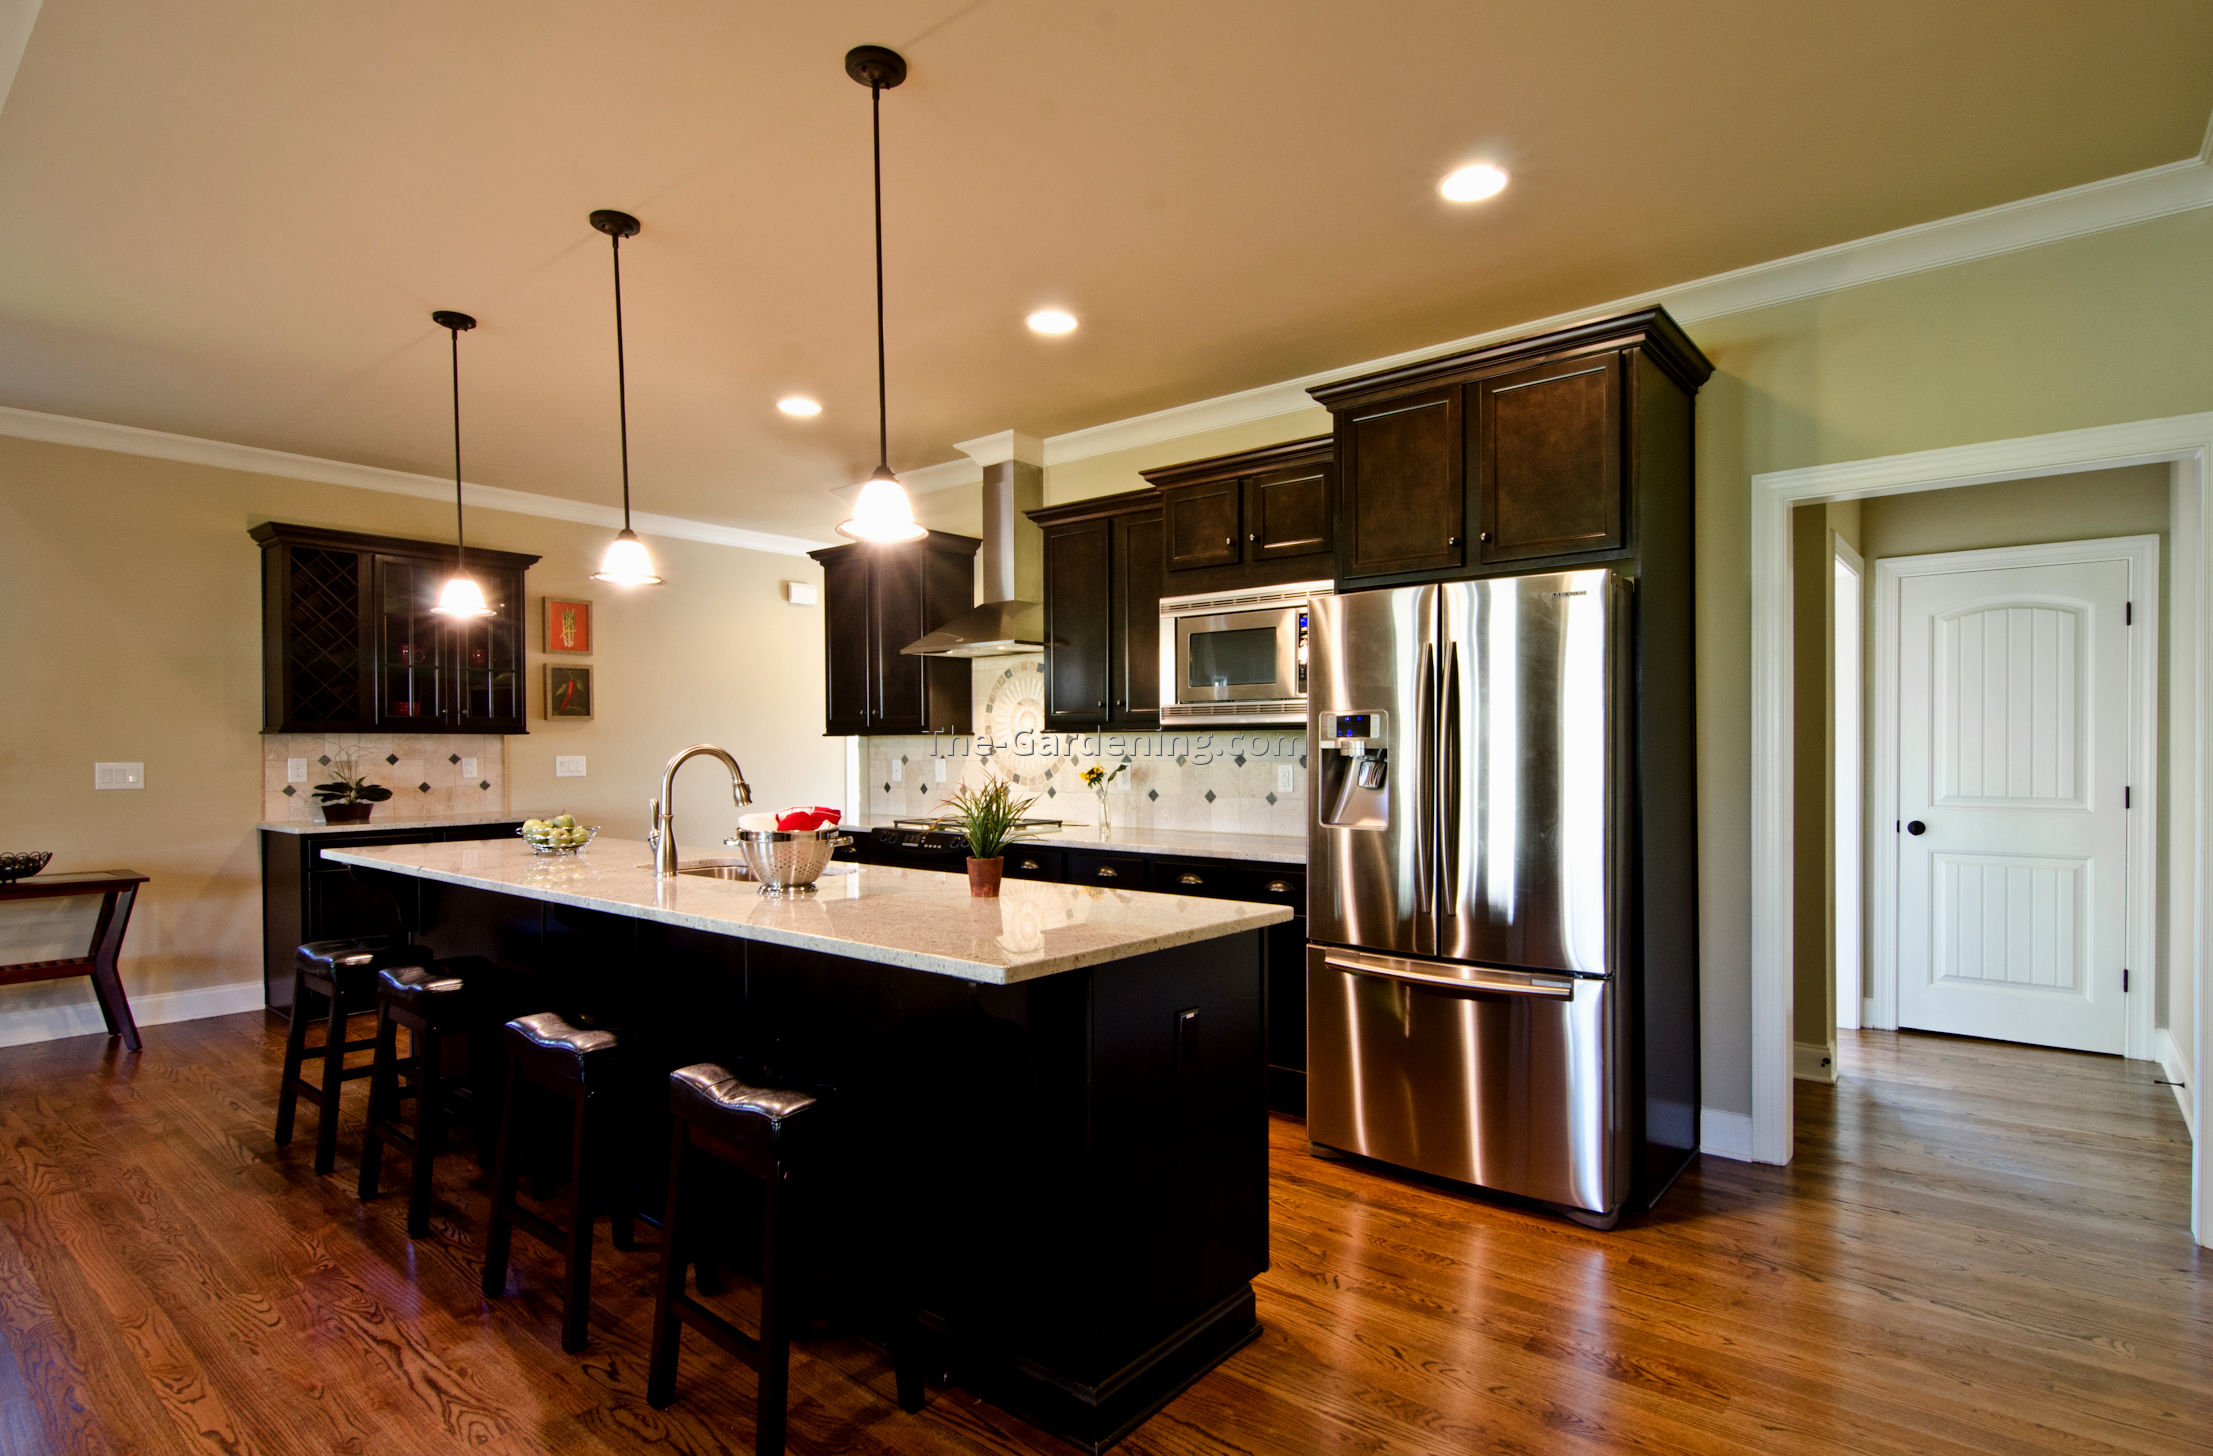 average kitchen remodel cost 13 – Abacoore Electric